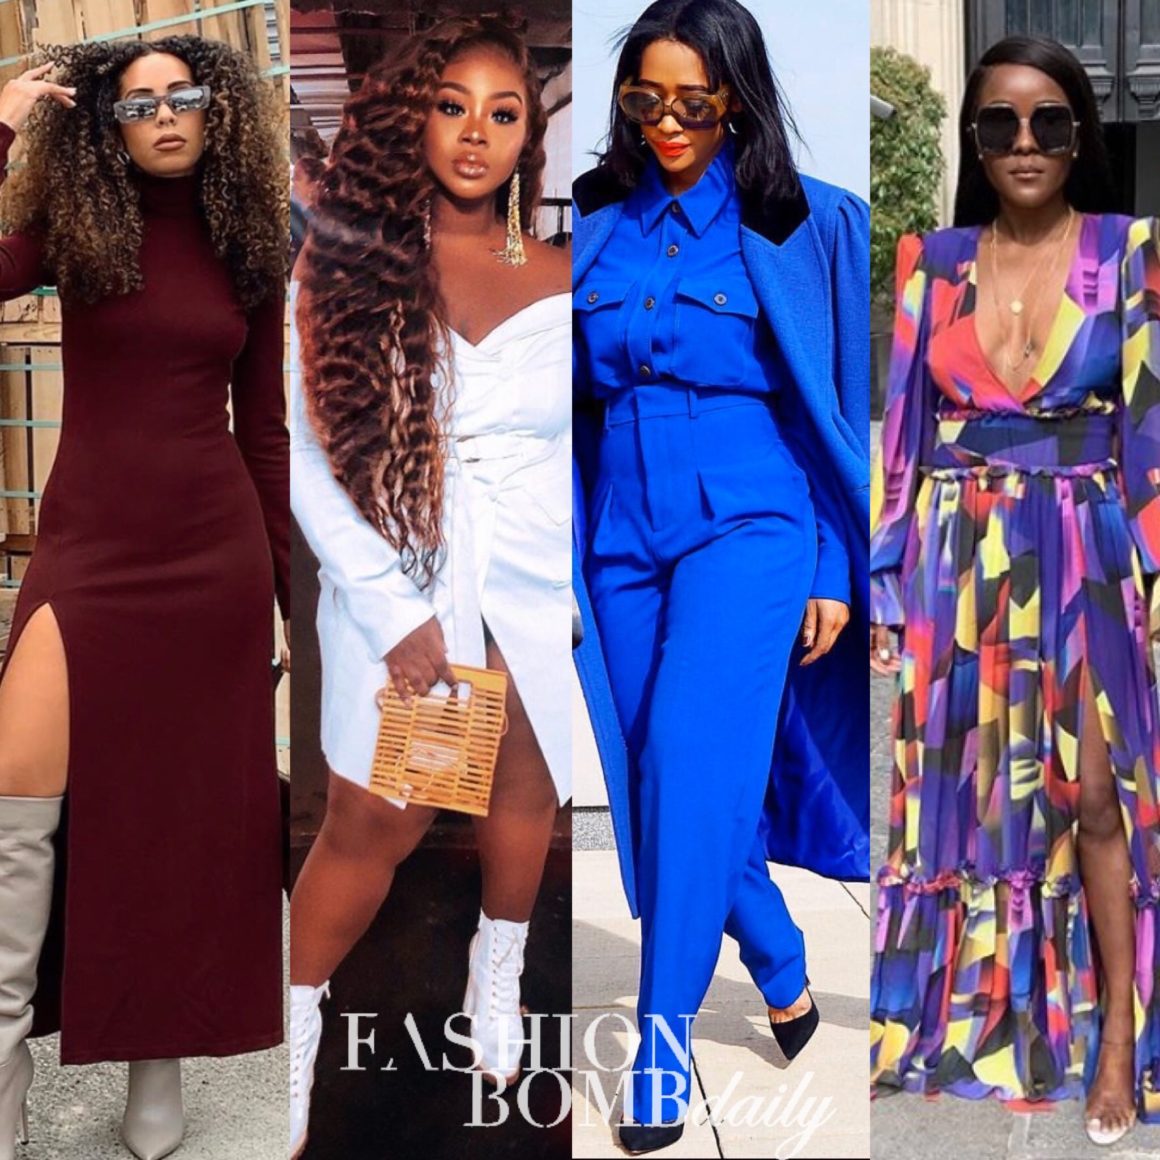 Vote for Fashion Bombshell of the Week November 1, 2019: Farah from NYC ...